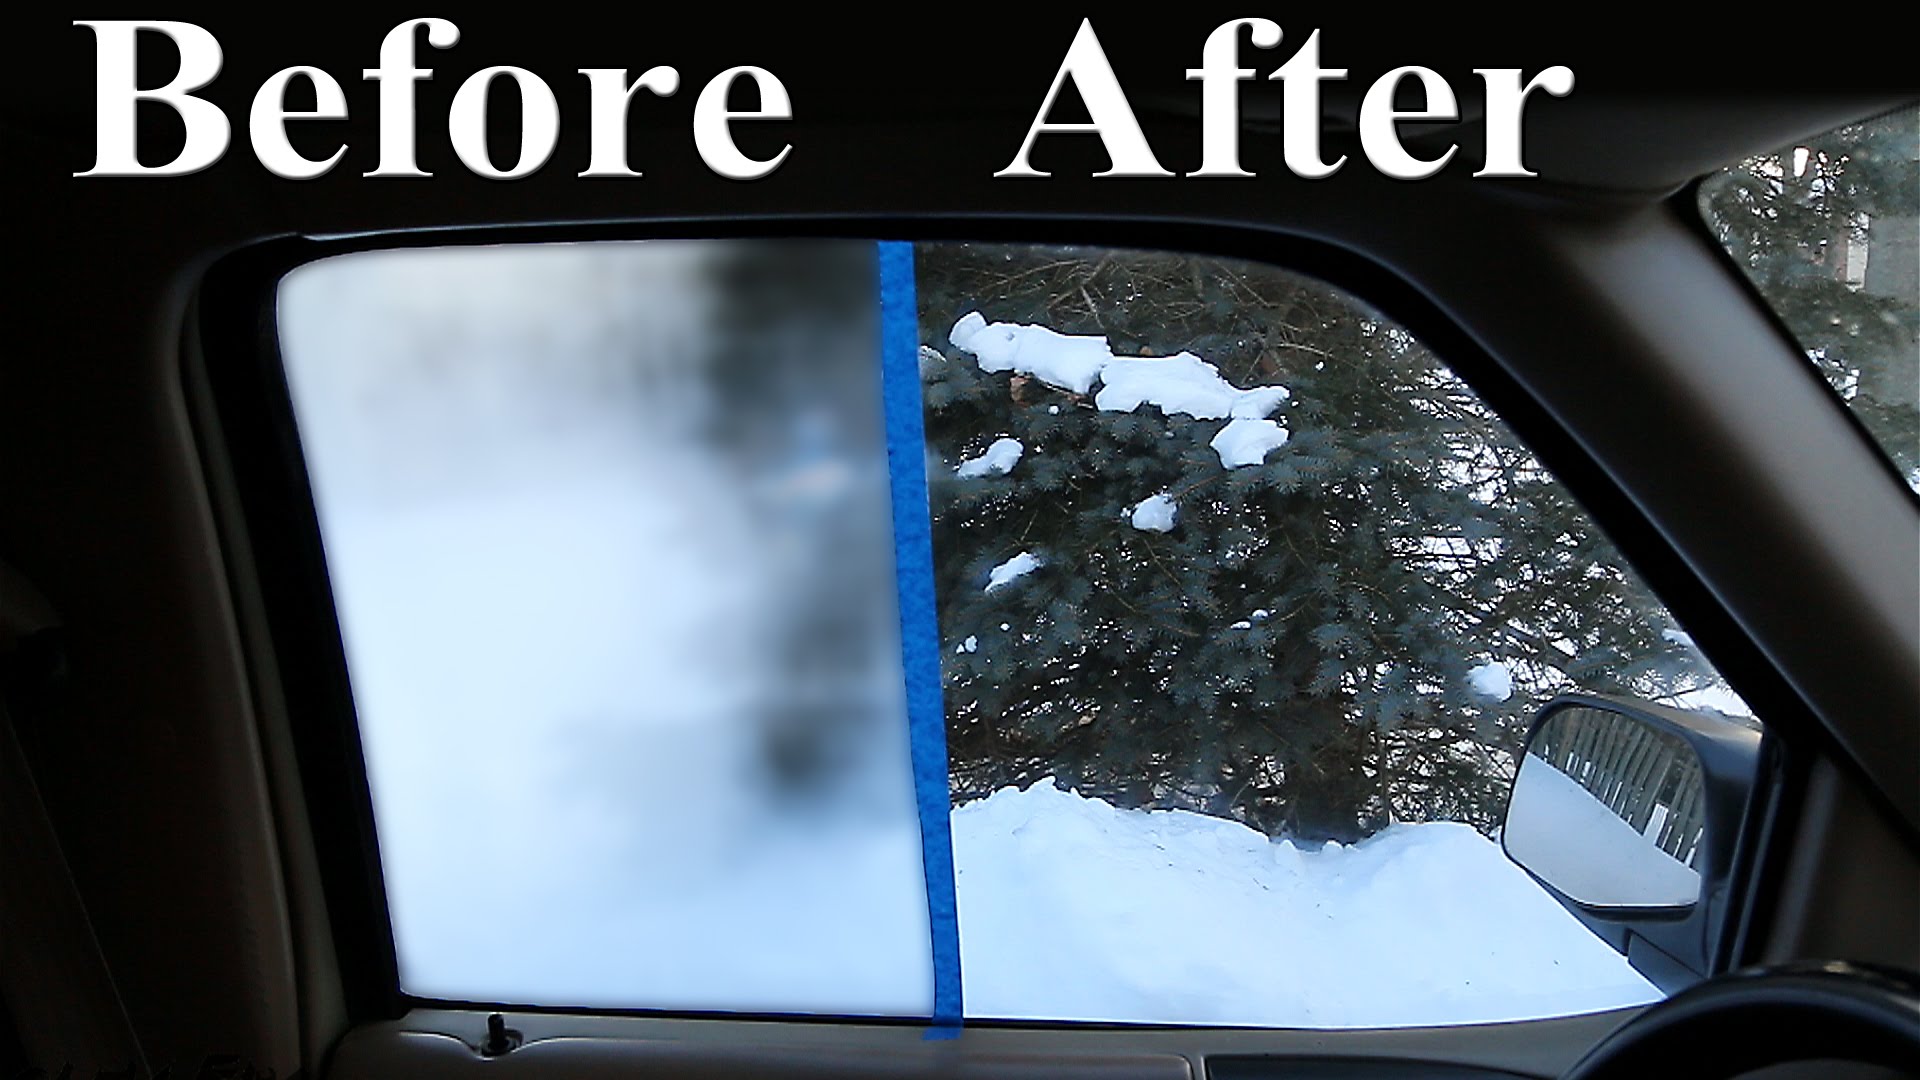 How to Stop Car Windows from Steaming Up - YouTube